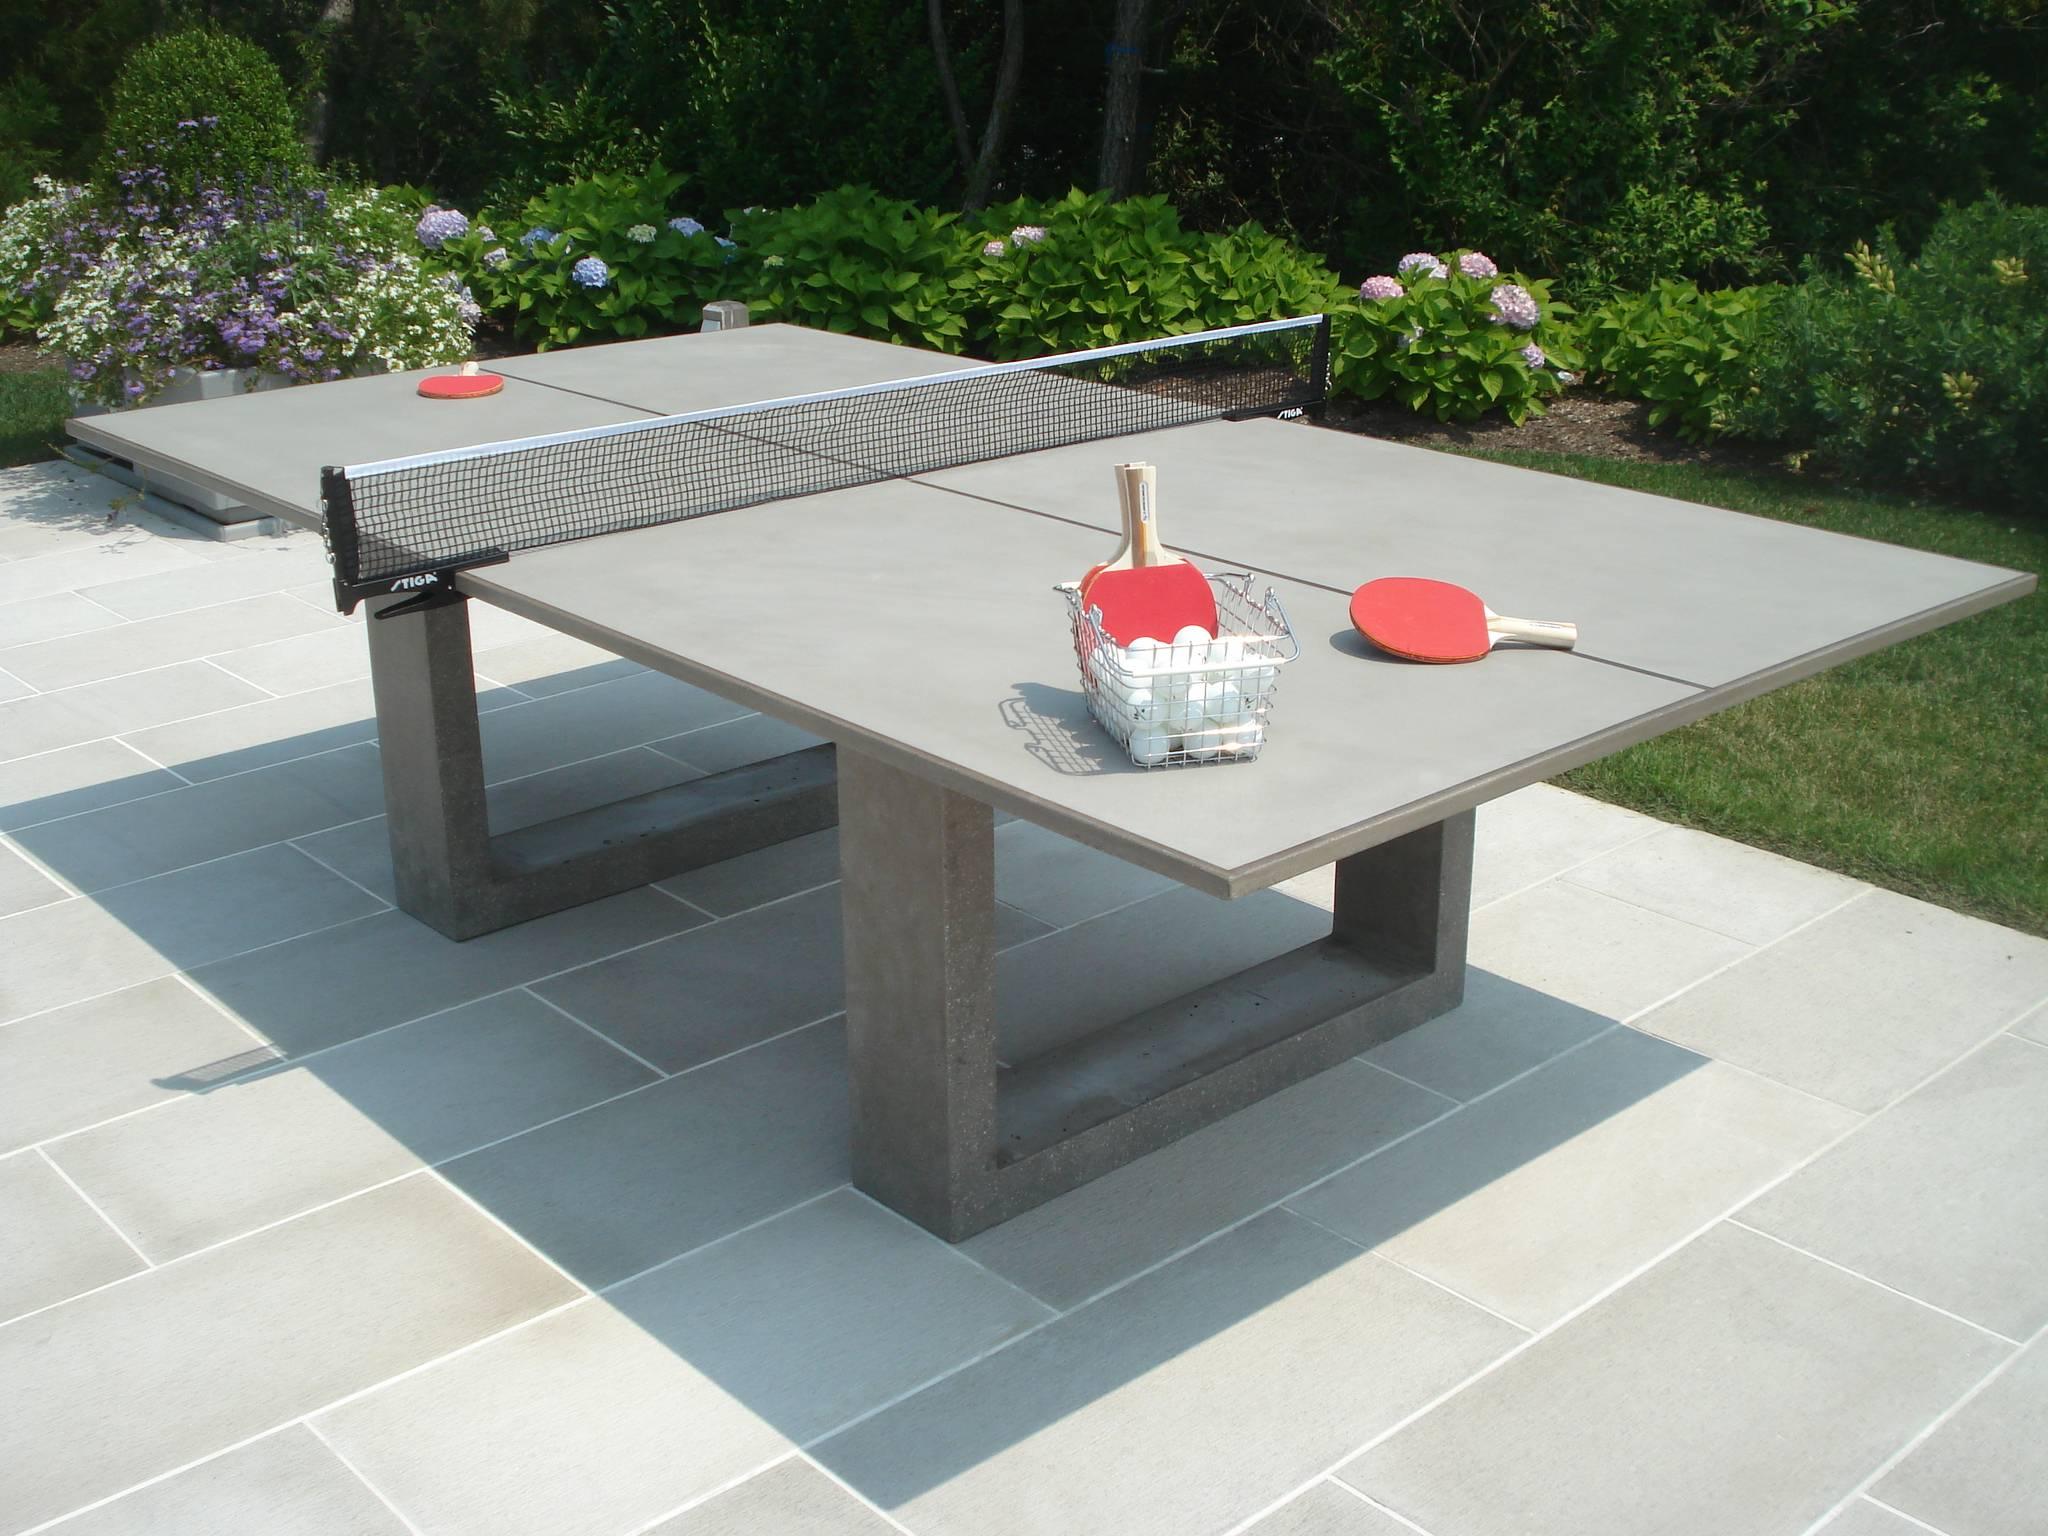 Modern James de Wulf Concrete Ping Pong Table - Light Grey Finish, Available Now For Sale